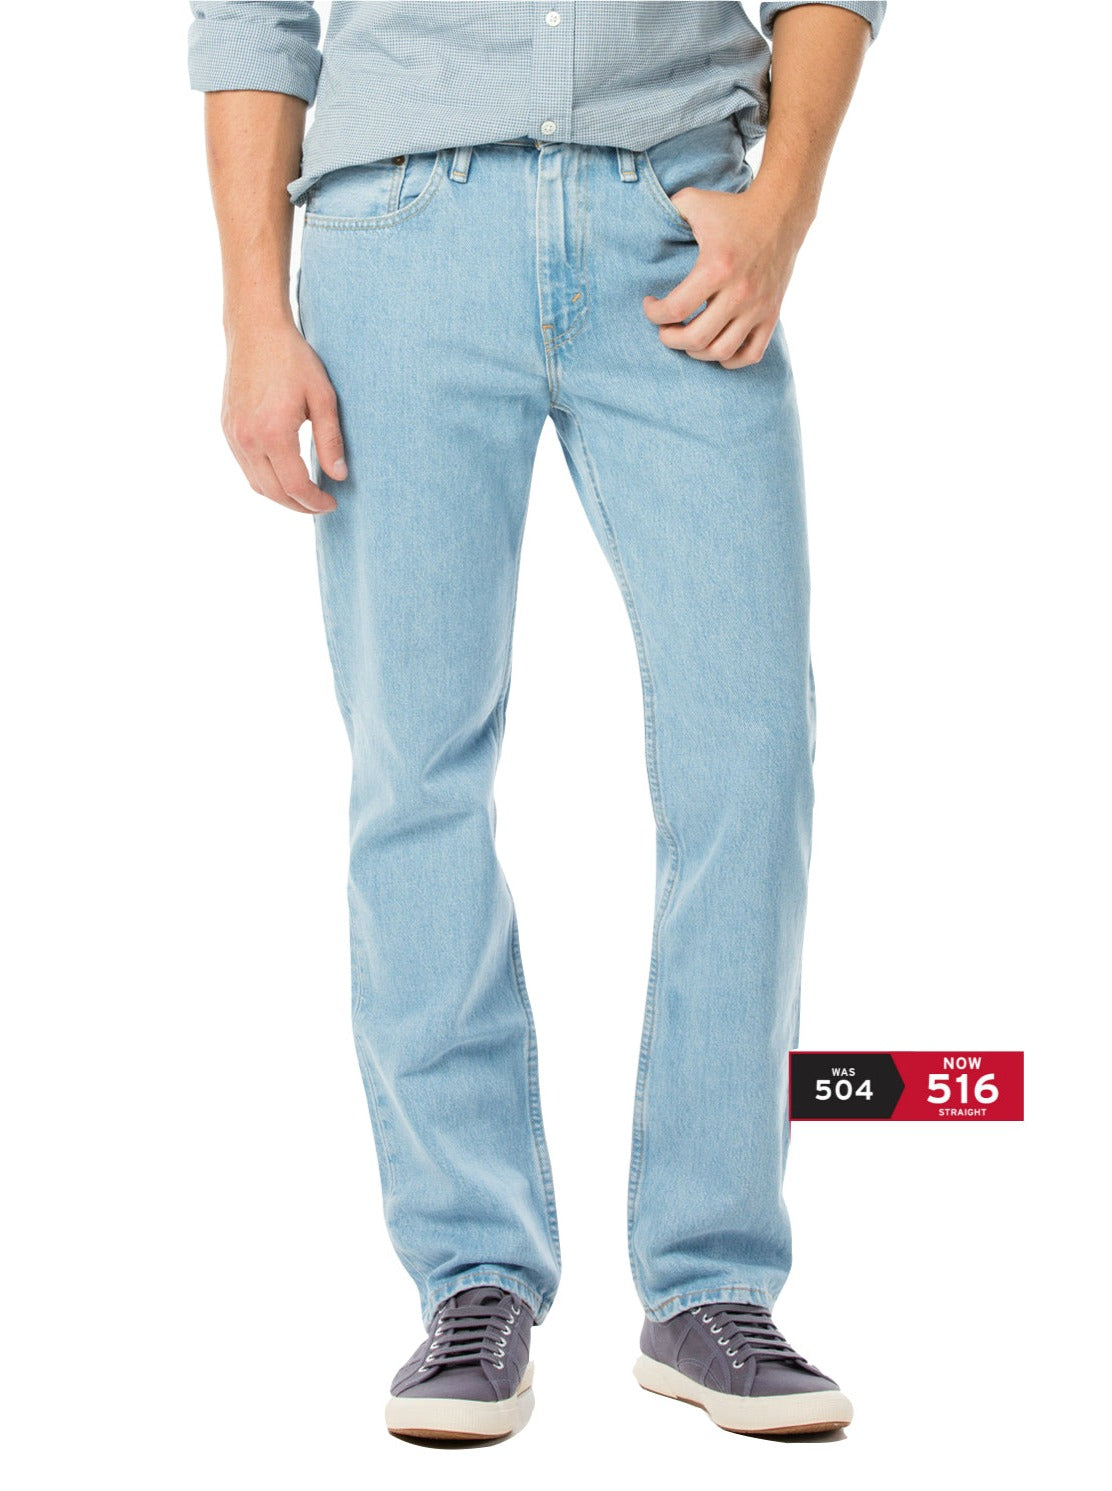 Levi's - 516 Straight Fit Jeans - Superwash – 88 Jeans